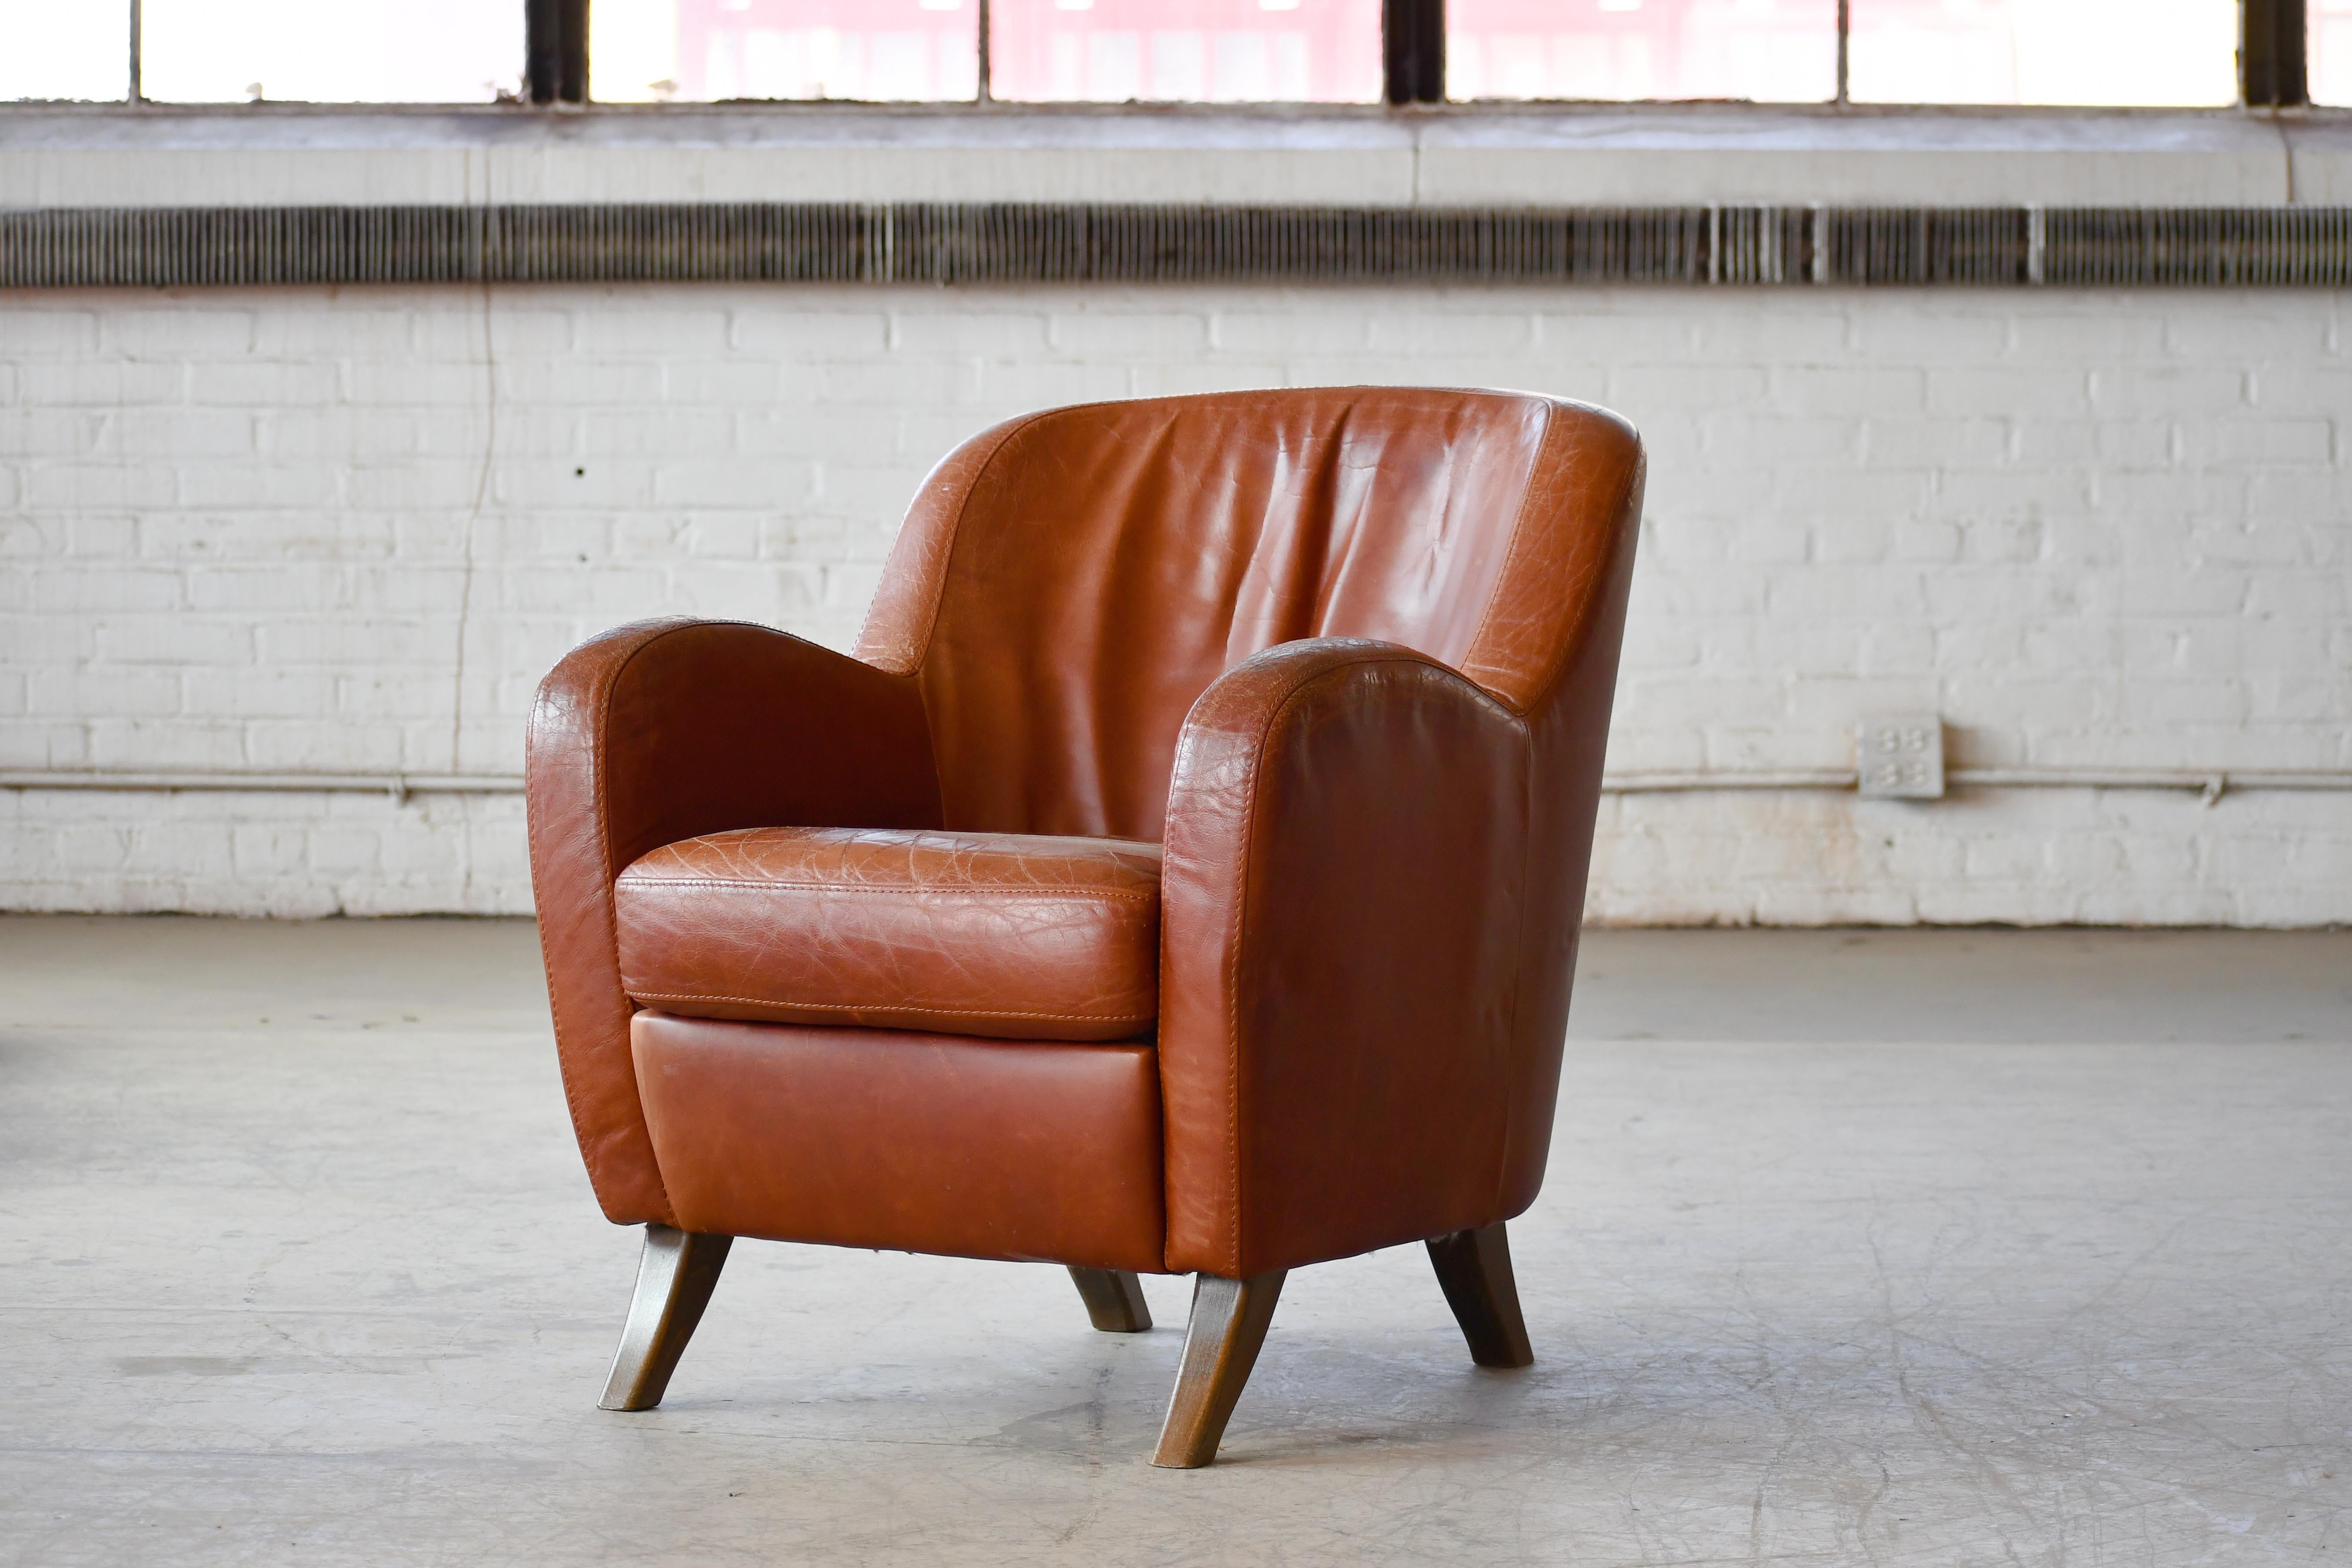 Late 20th Century Danish Modern Leather Lounge Chair in the style of Berga Mobler  For Sale